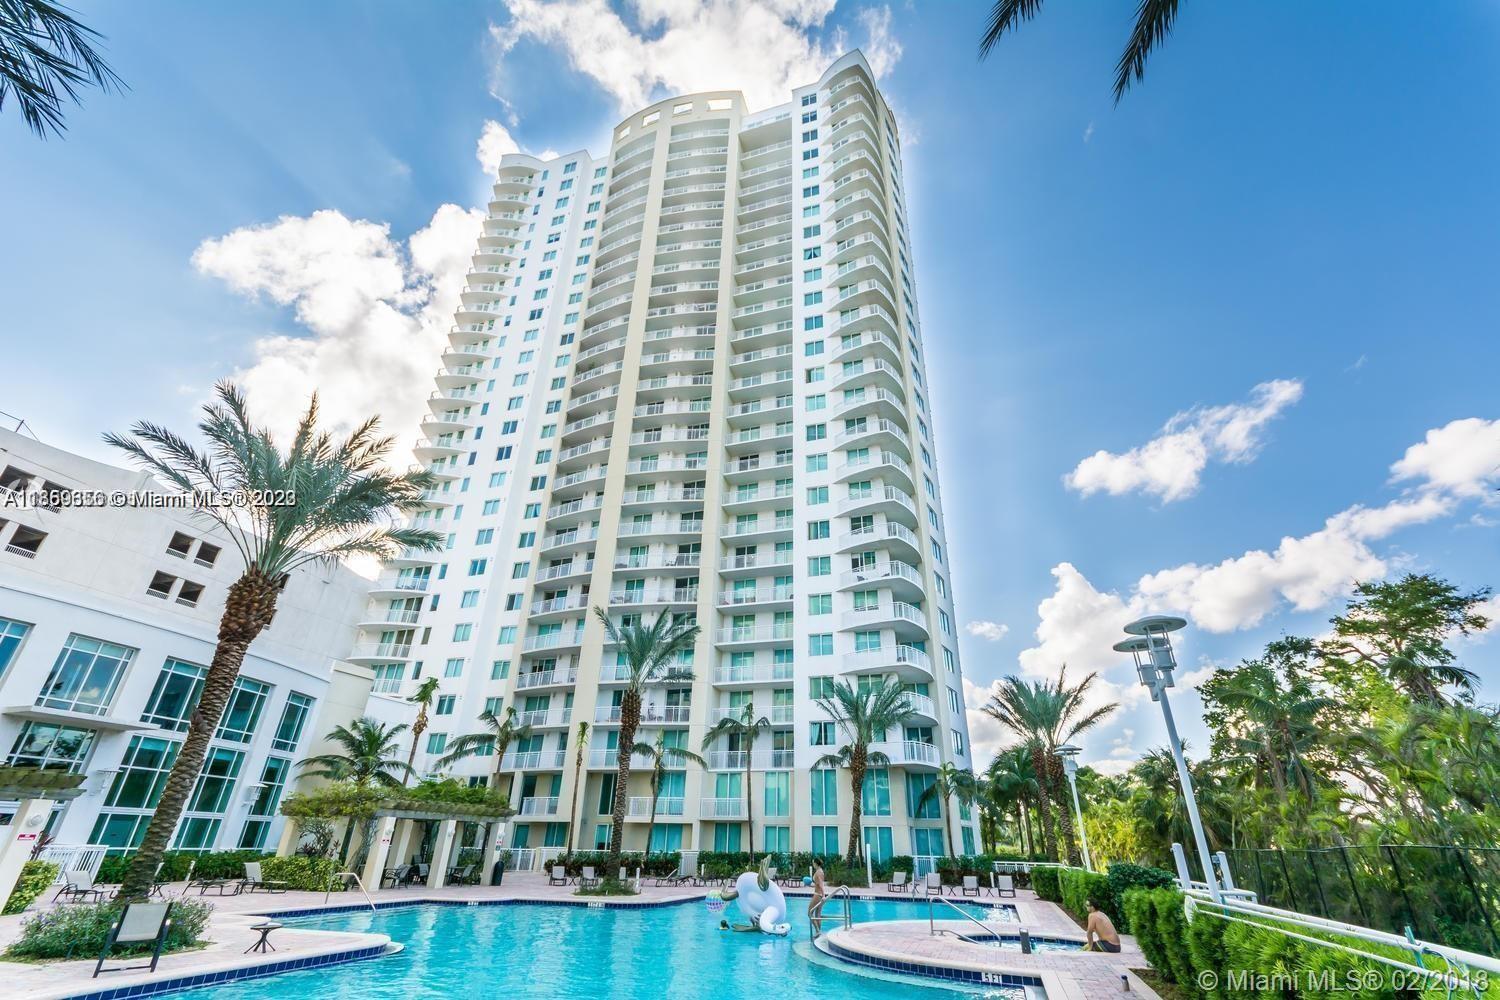 LOCATION, VIEW " GOLF, POOL, INTRACOSTAL AND CITY " IN THIS EXCELLENT CONDOMINIUM. UNIT WITH 1 BEDRO